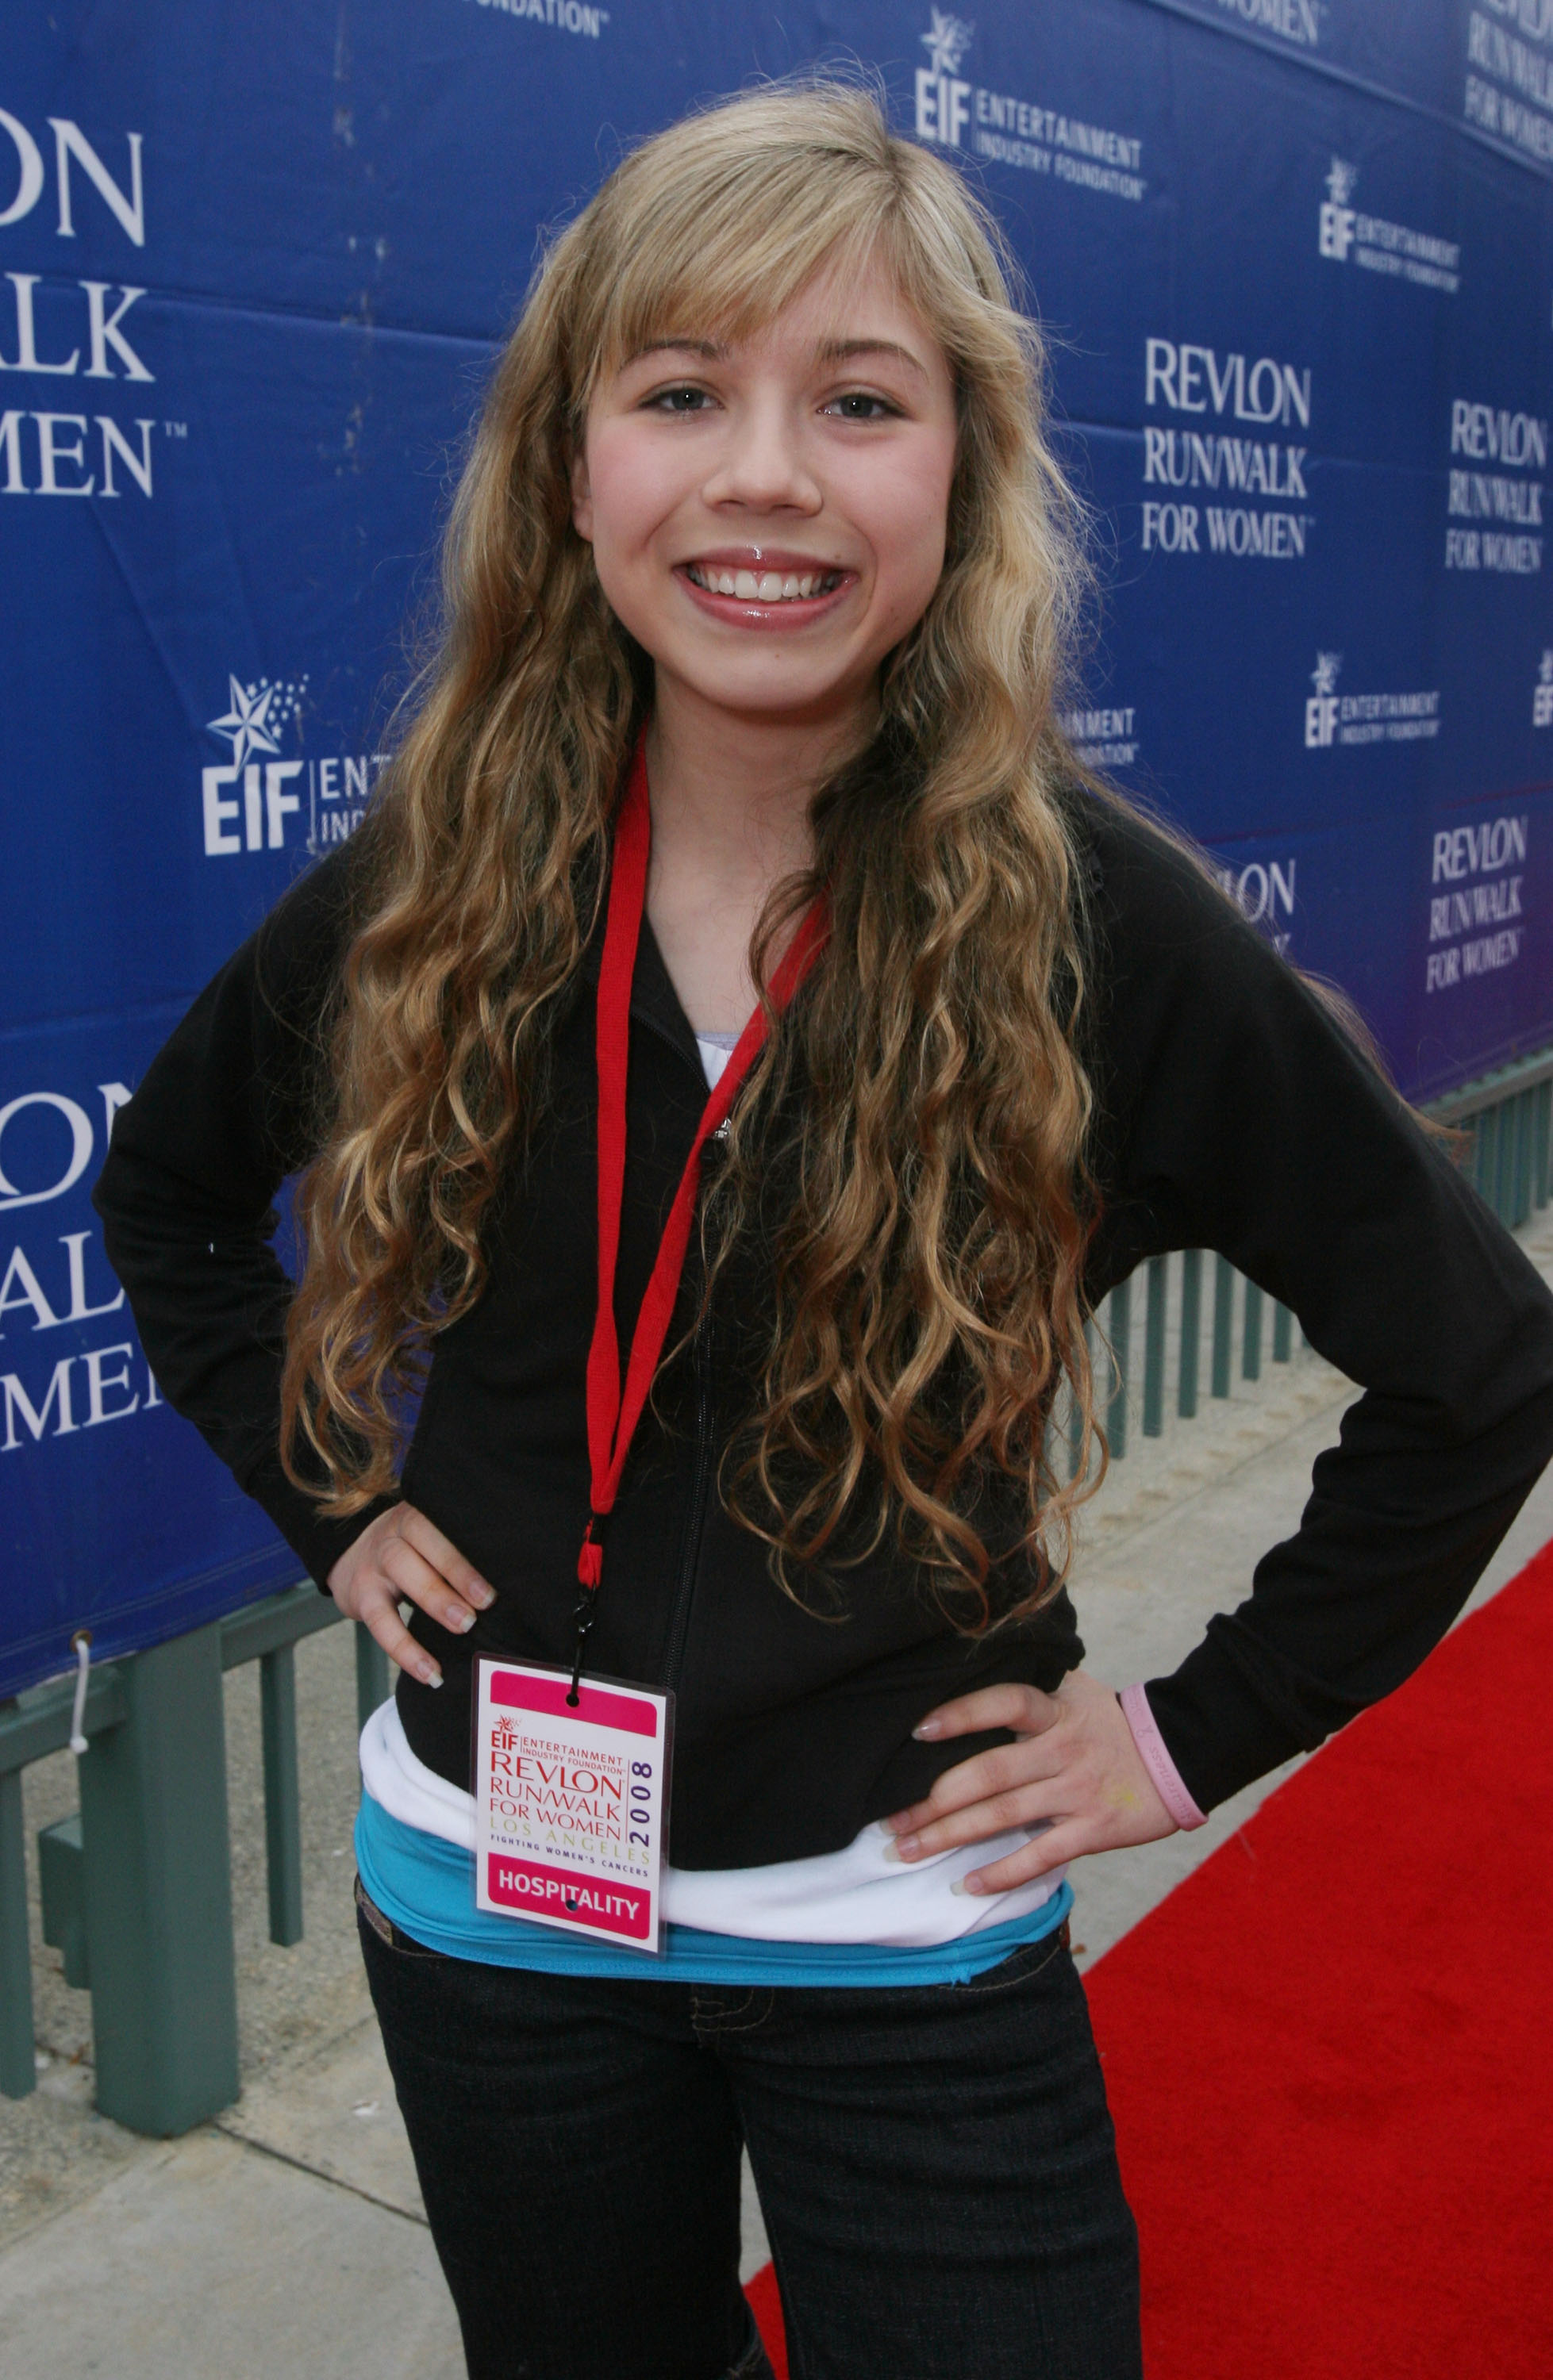 Jennette McCurdy attends the 15th Annual Entertainment Industry Foundation's Revlon Run/Walk on May 10, 2008 | Source: Getty Images